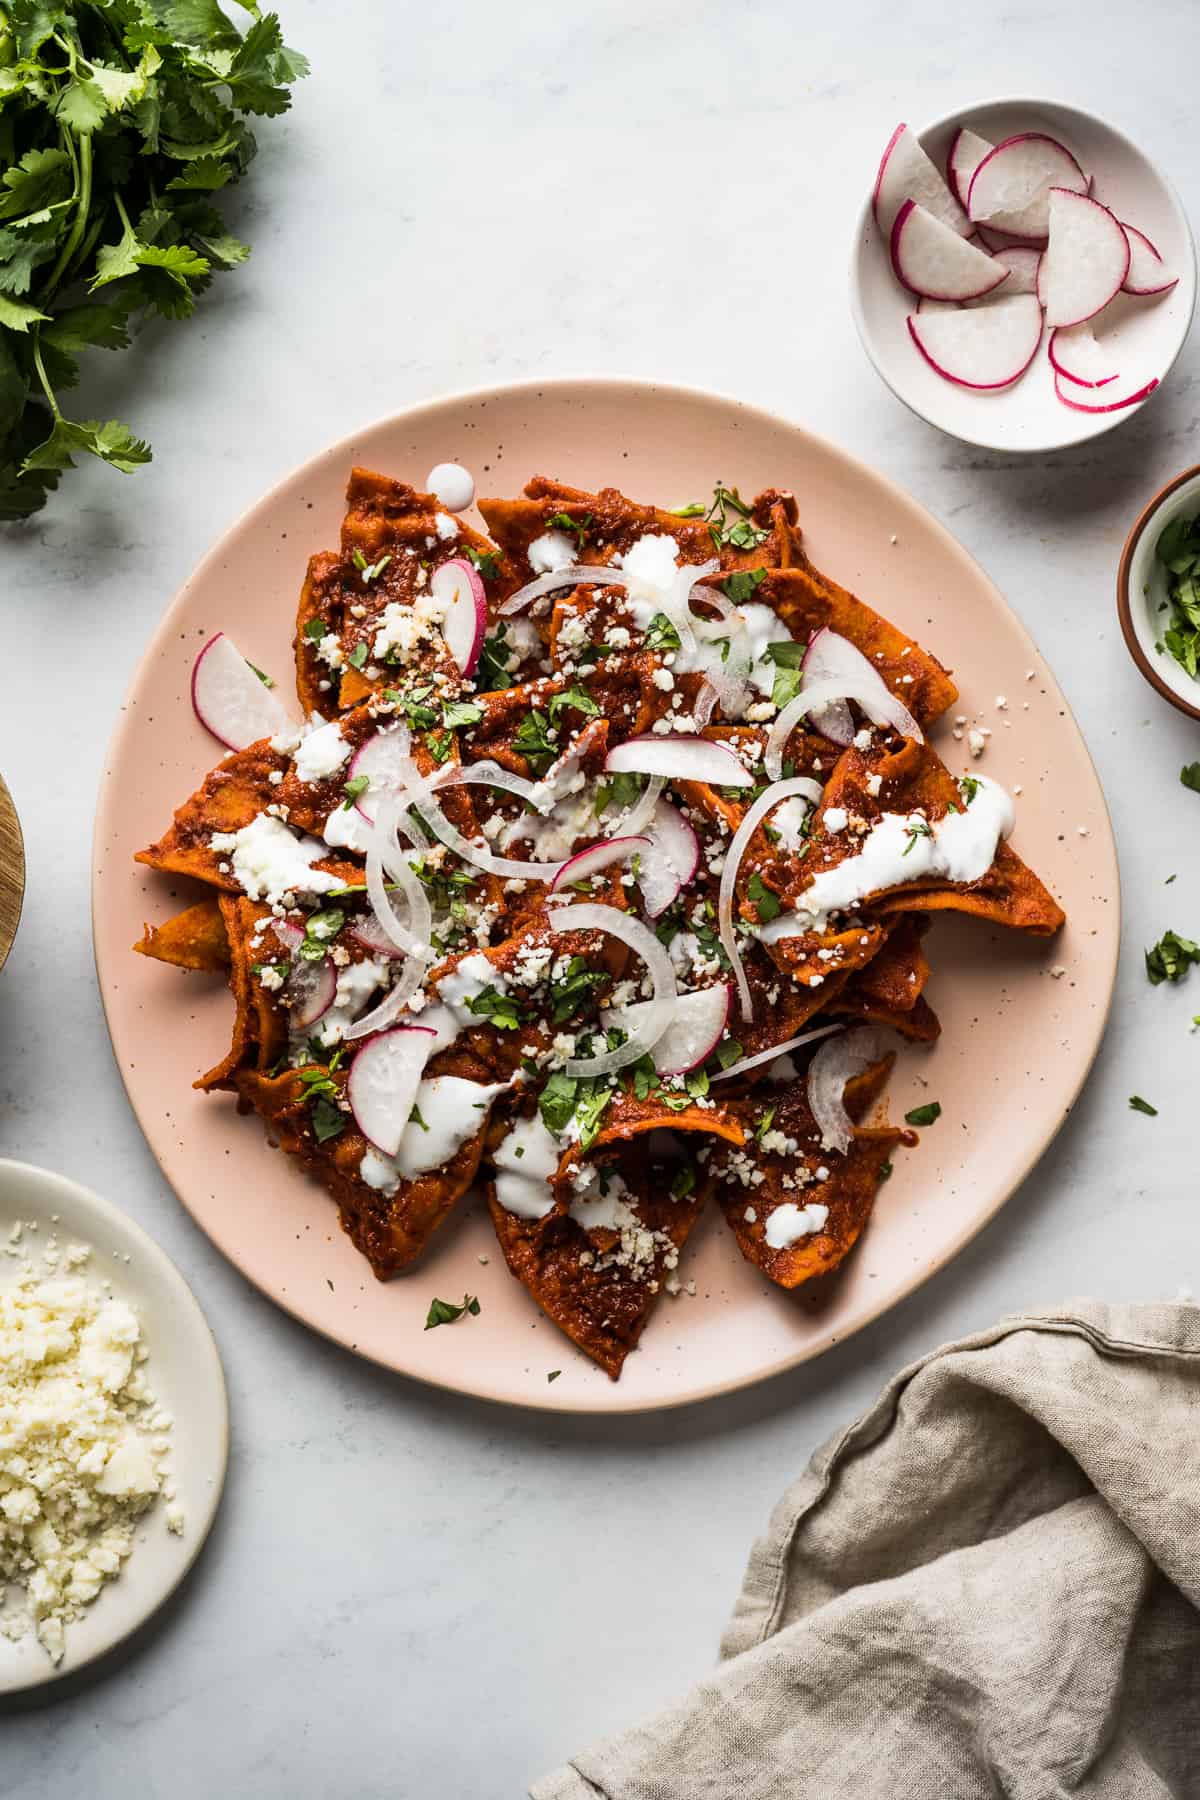 Chilaquiles on a plate with red sauce and topped with Mexican crema, onions, cotija cheese, and cilantro.